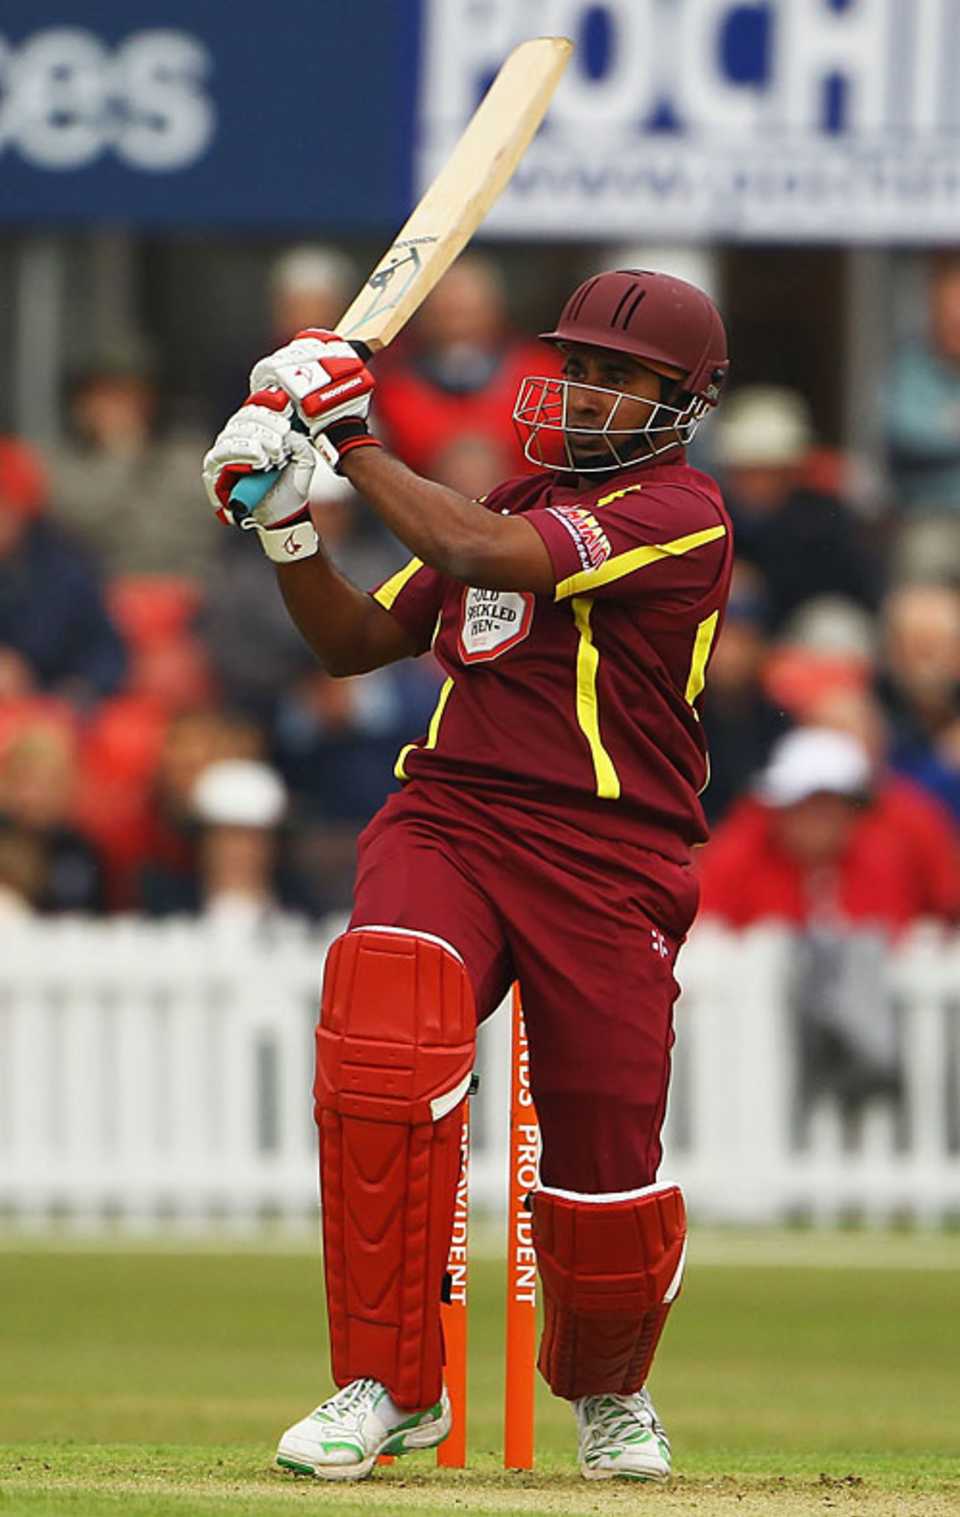 Chaminda Vaas clubbed 50 off 36 balls to launch Northamptonshire